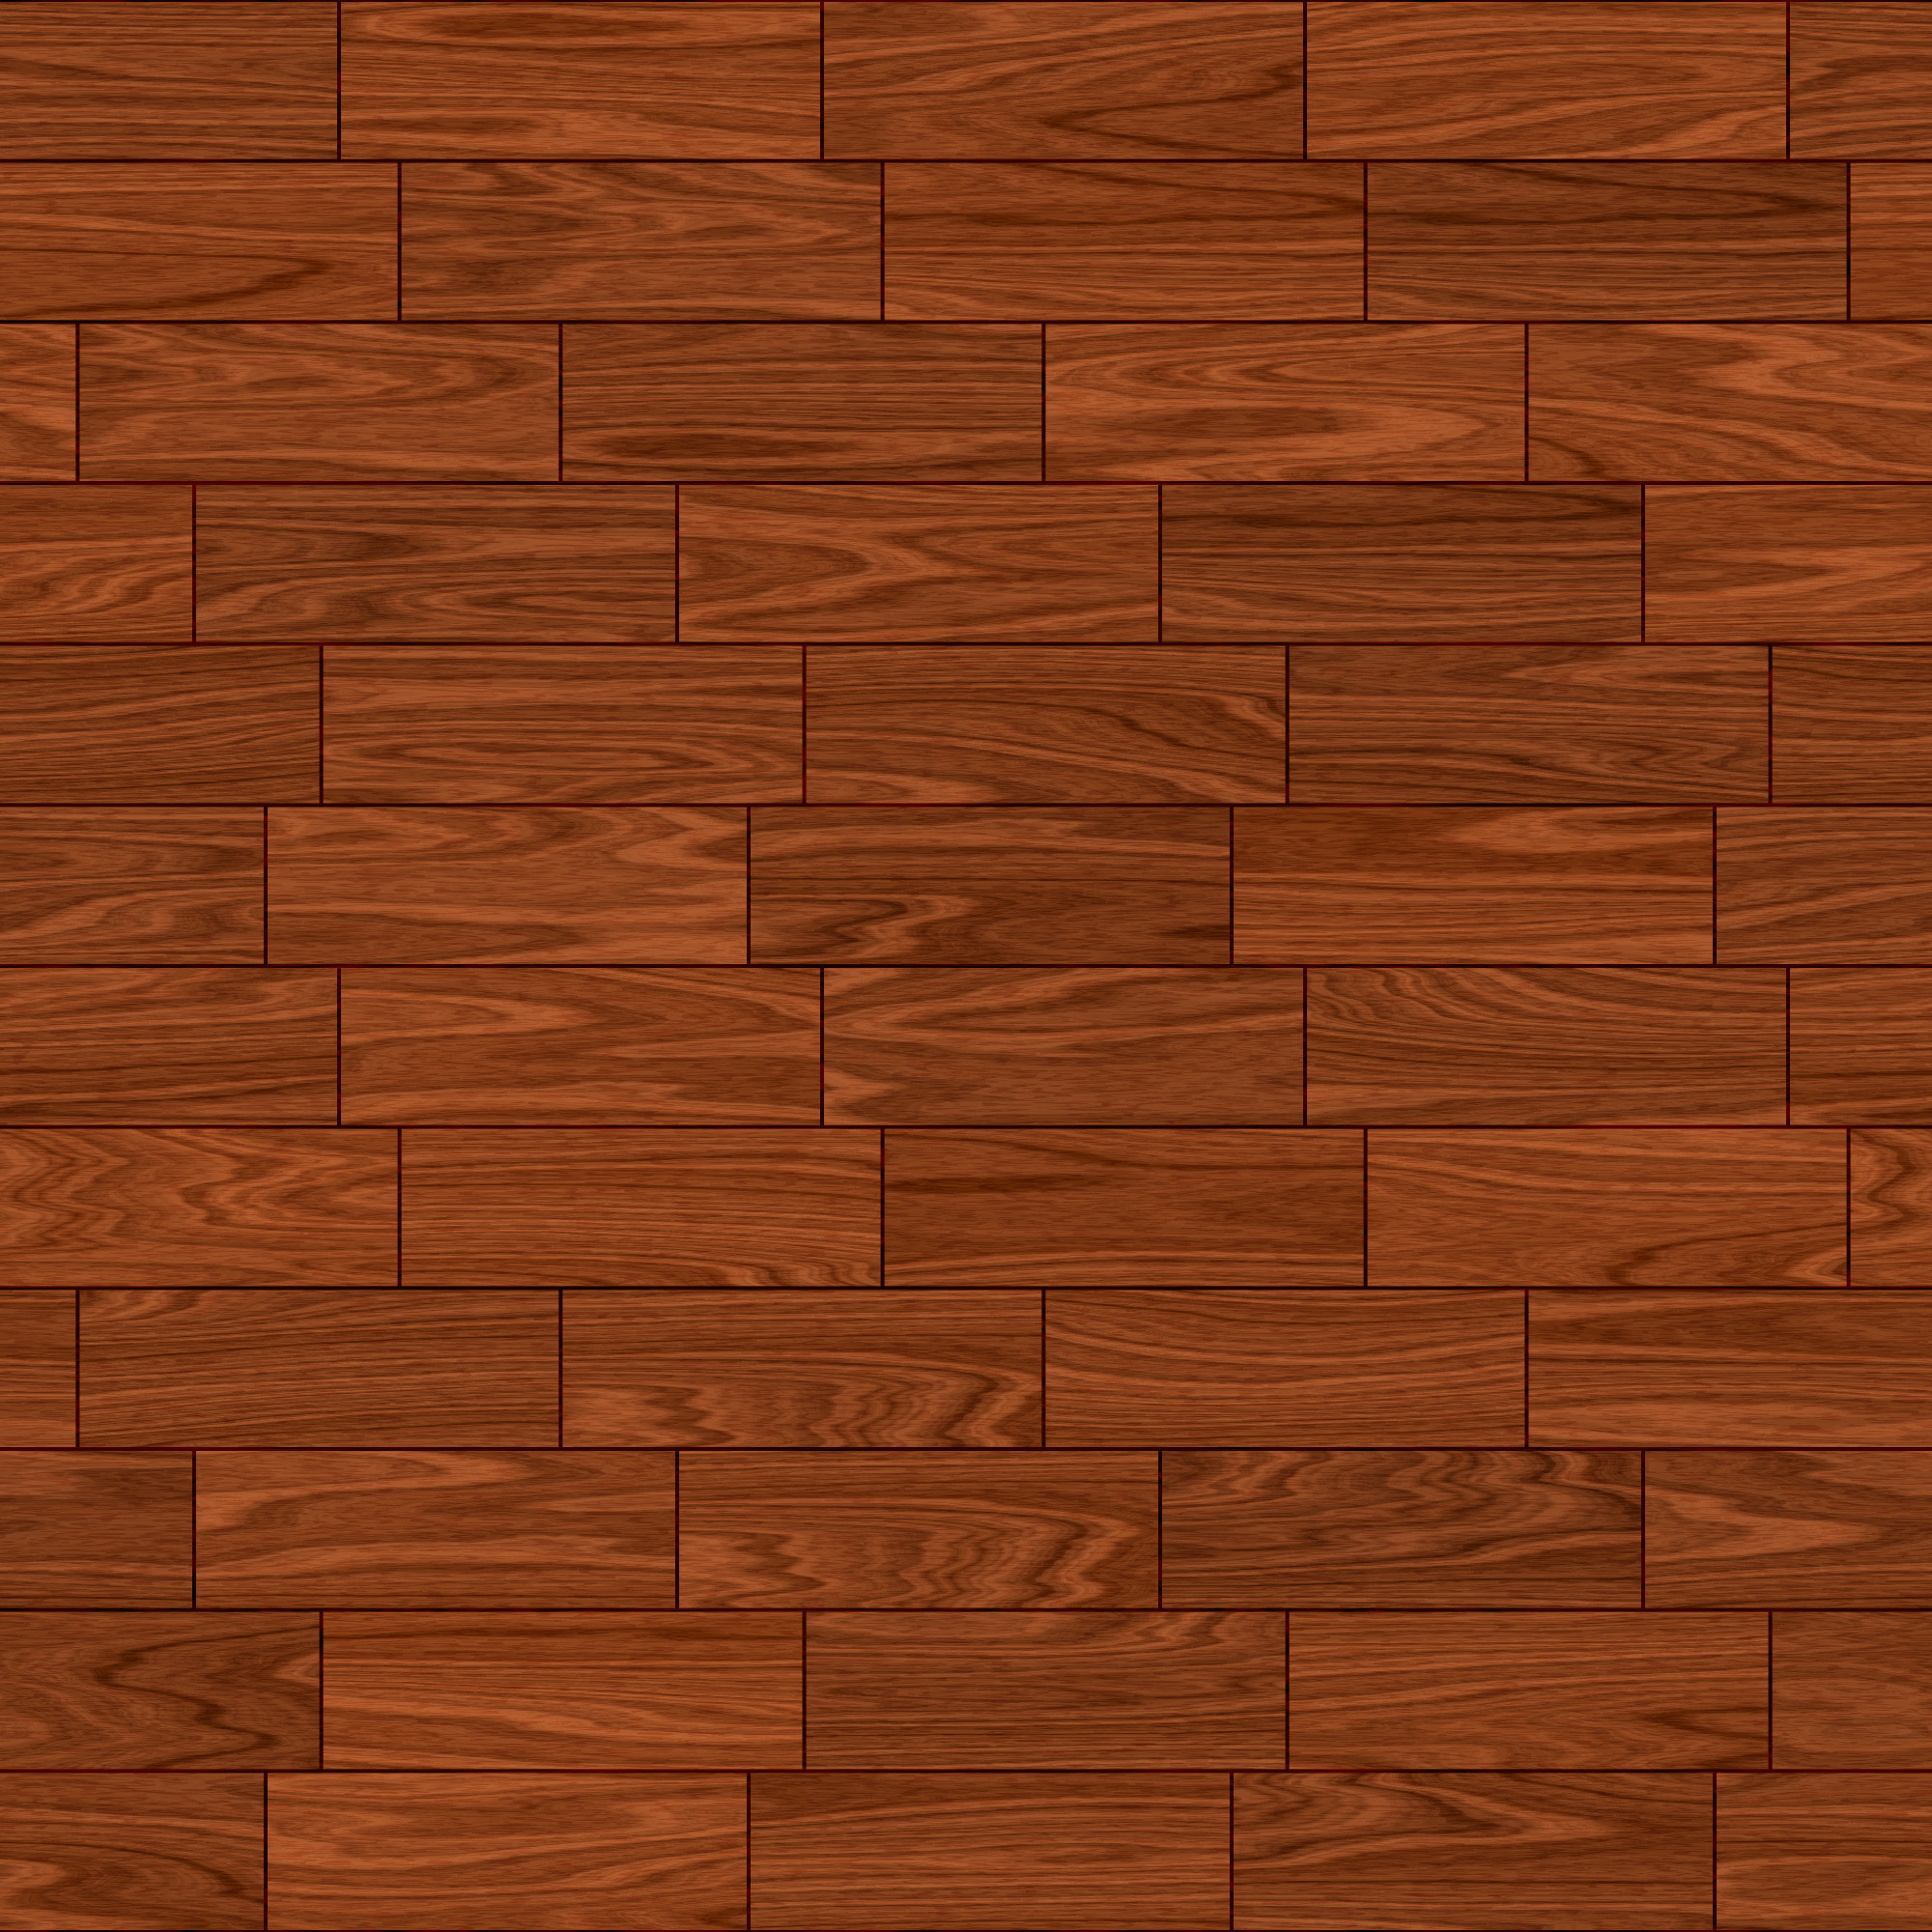 Free wood floor texture – rich wood patterns with wooden planks in this seamless background seamless wood planks background